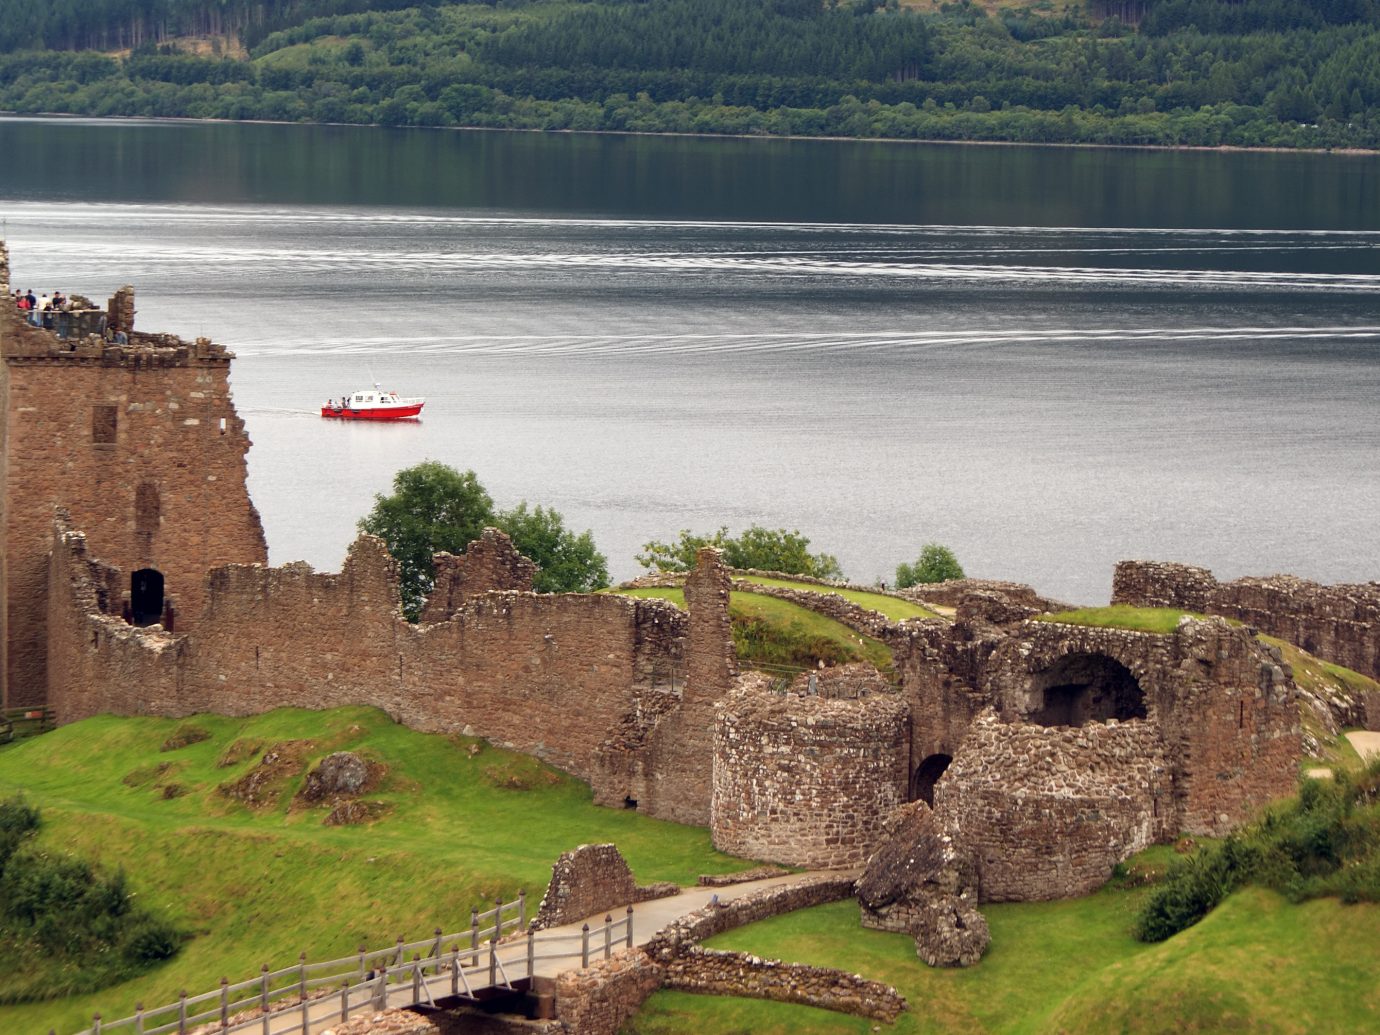 Landmarks Offbeat grass outdoor rock loch highland fortification reservoir Nature mountain sky stone castle building tree landscape Coast Lake water River bank old cliff